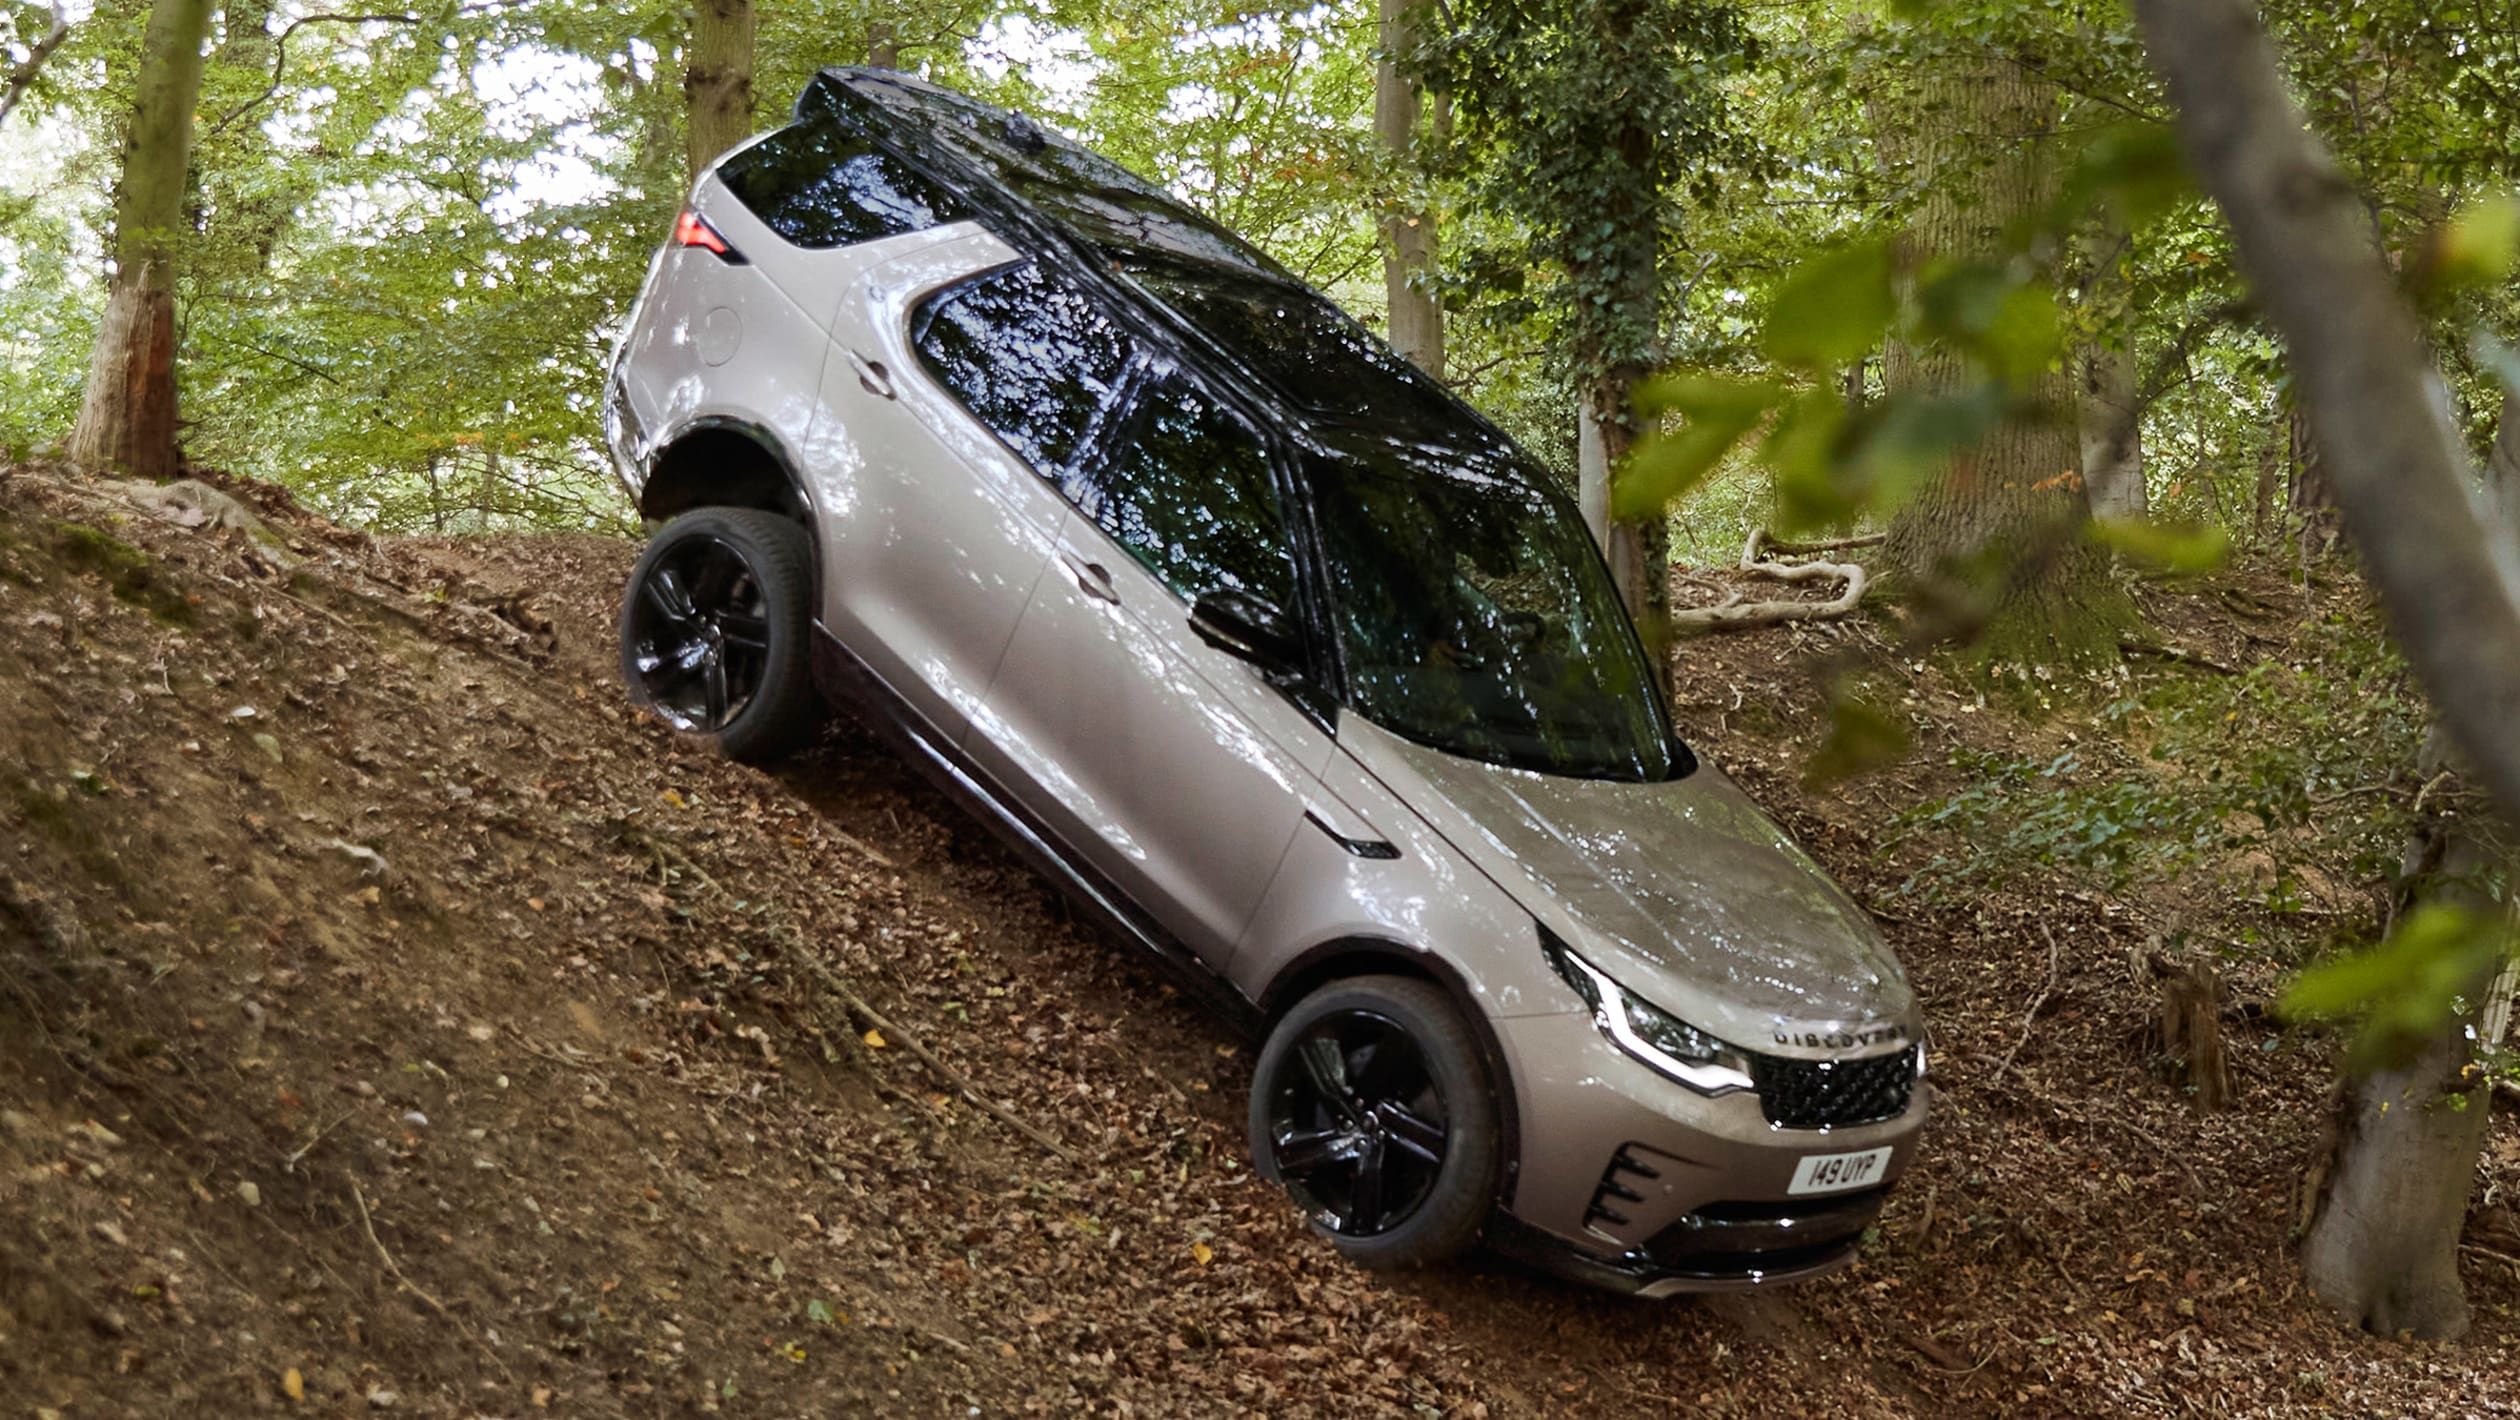 aria-label="New Land Rover Discovery facelift 2020 10"